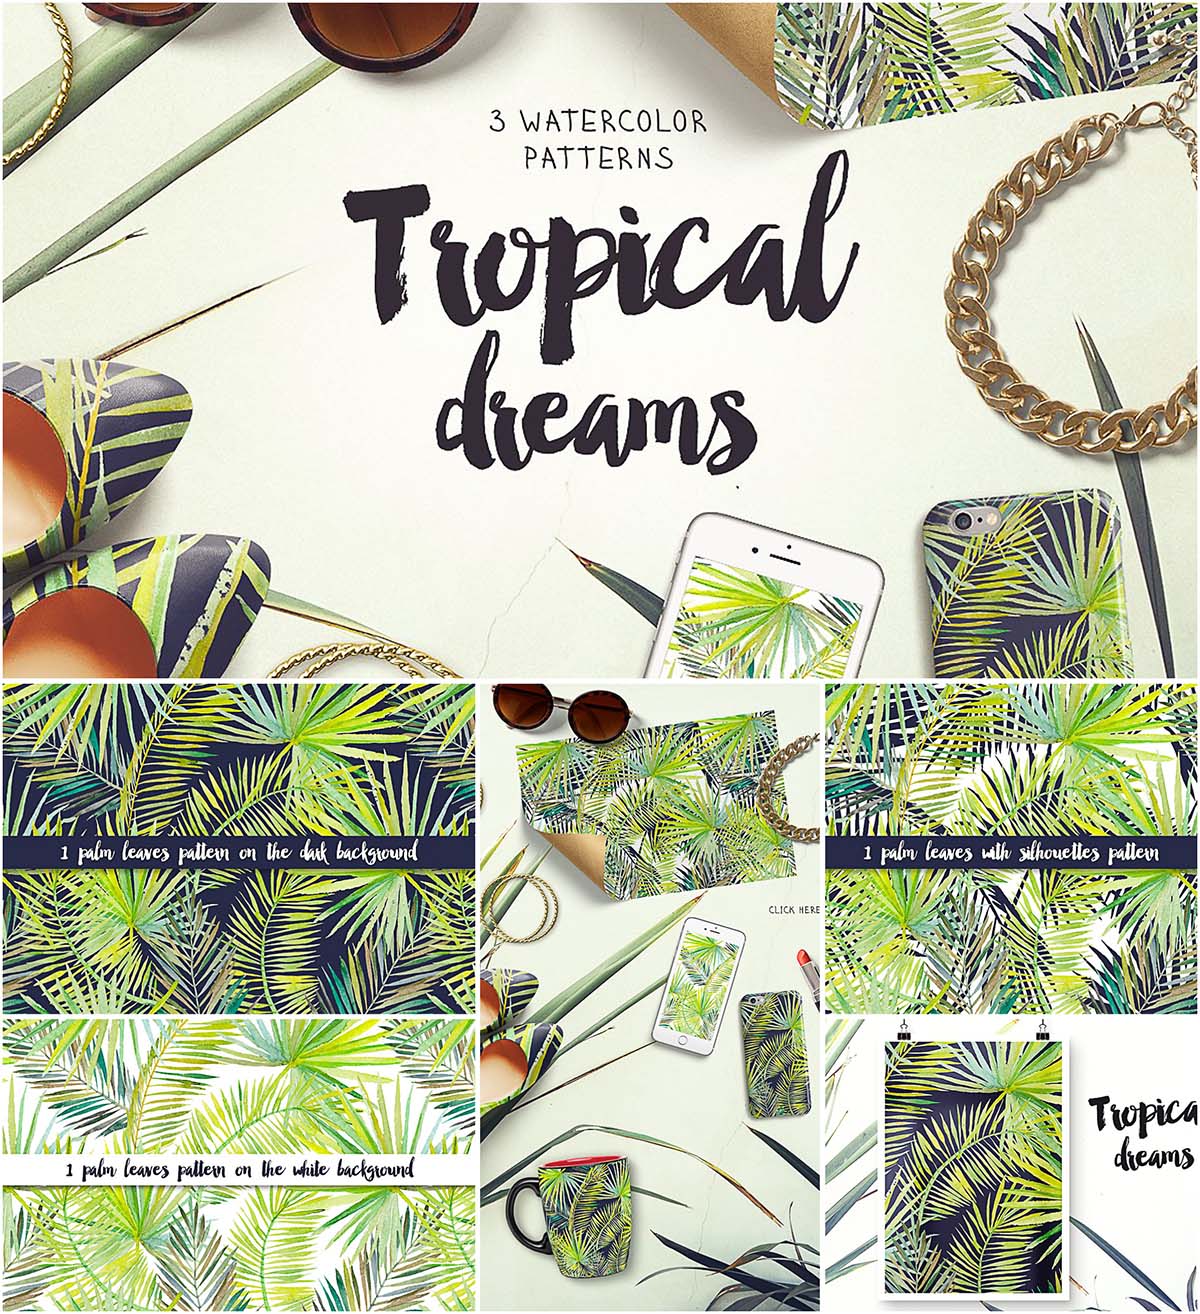 Tropical dreams pattern collection